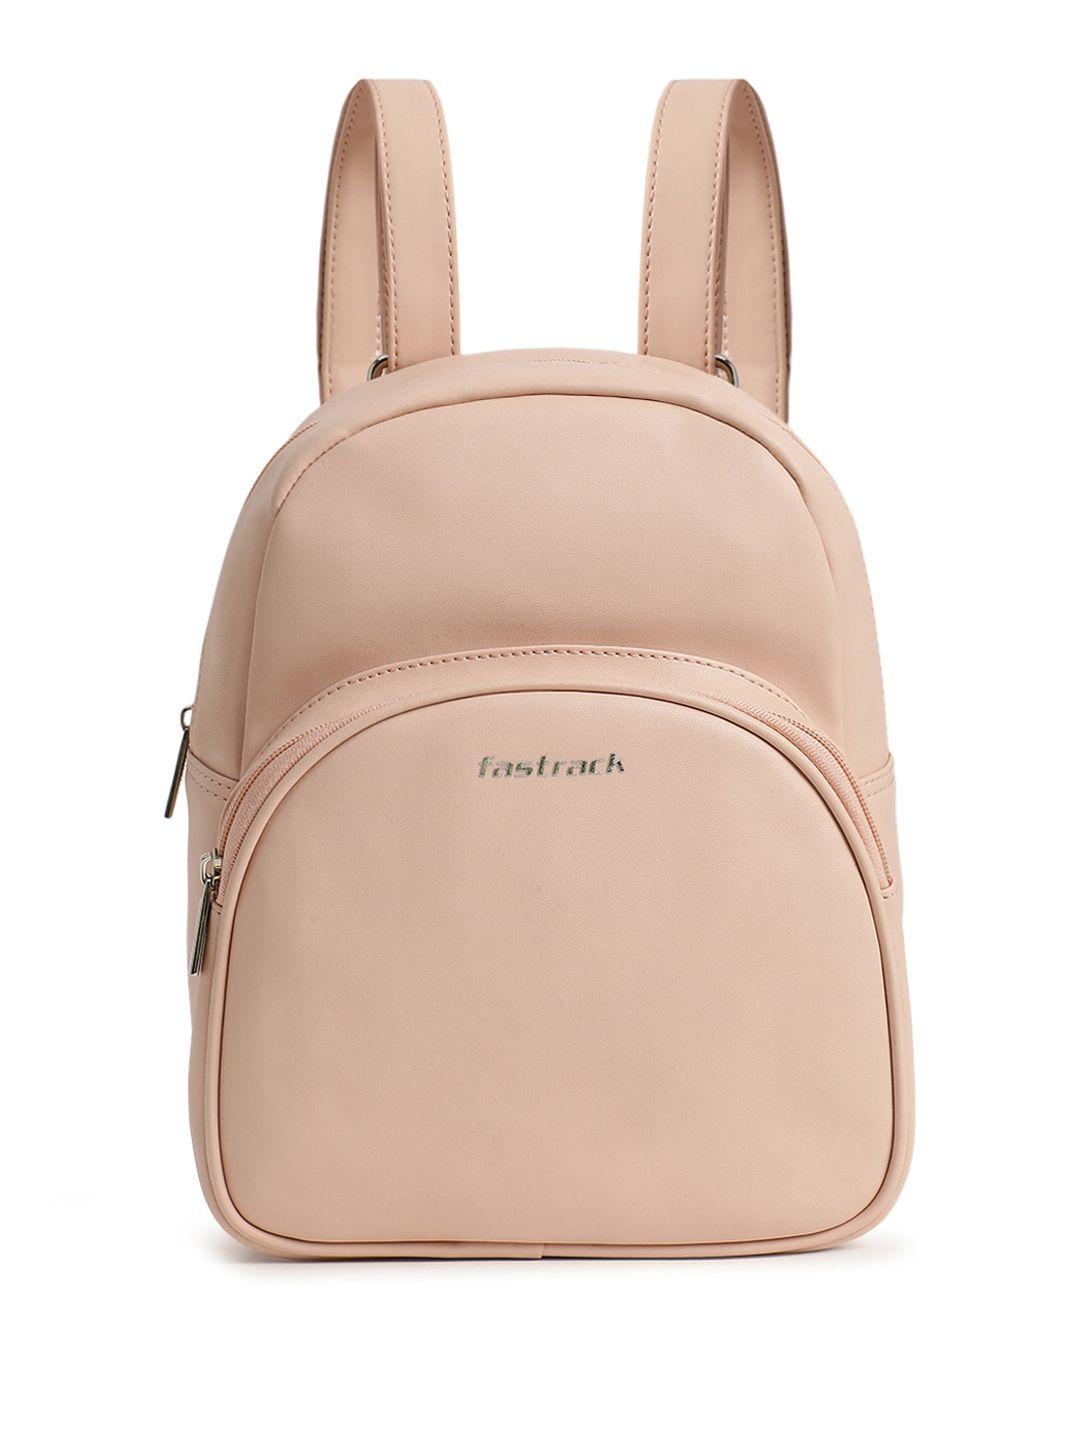 fastrack pu structured backpacks